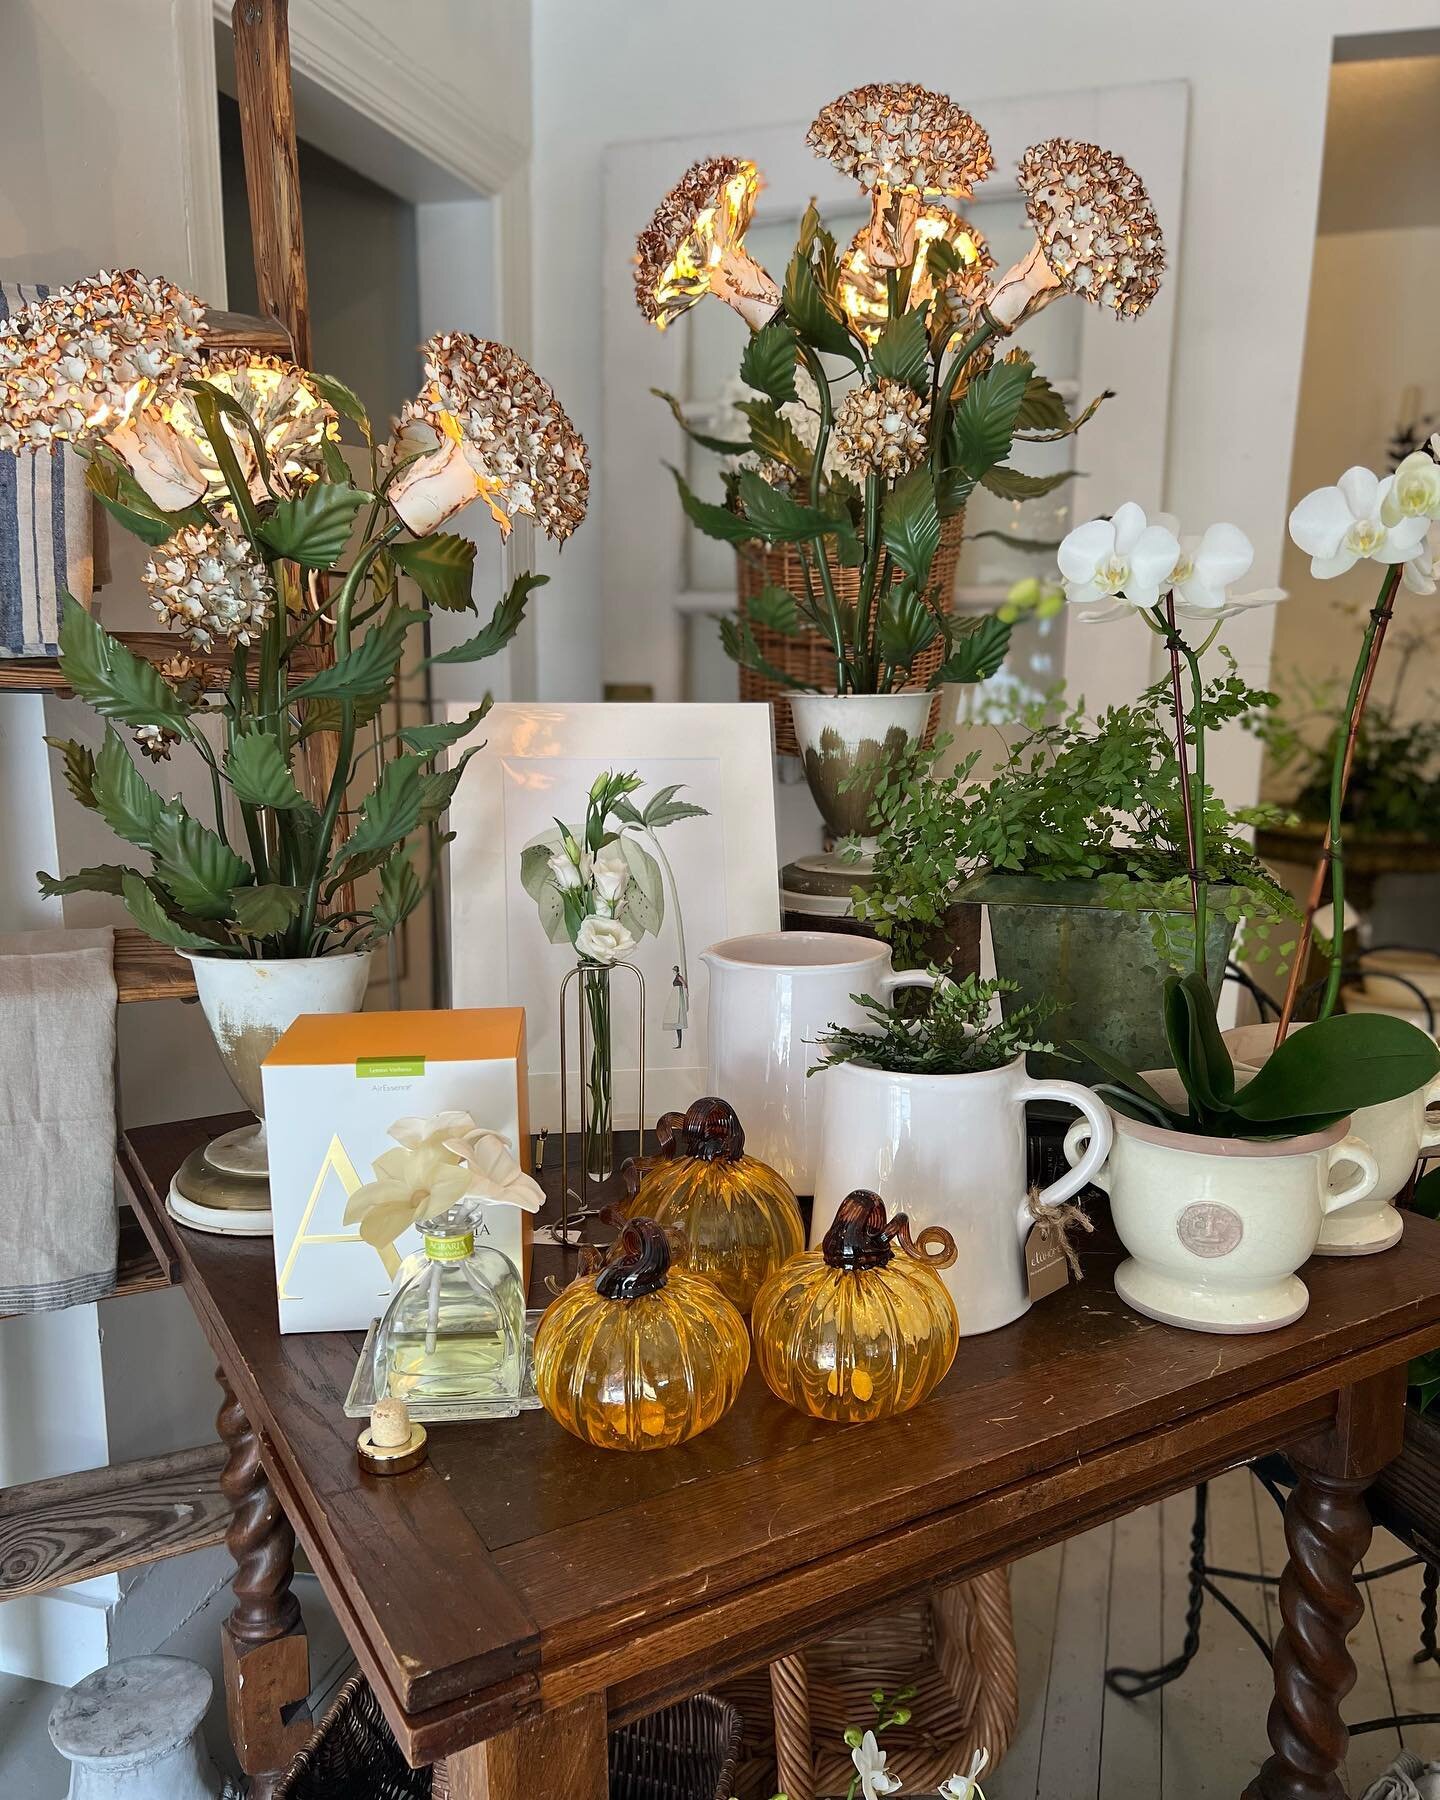 NEW!!! We&rsquo;ve reset our shop for fall and have lots of fun new pieces (and orchids for days!!!) 🤩 Stop in and find something fun for your Thursday! 

Open 10-4

#thewanderingpetal #florist #virginiabeach #shoplocal #herecomesfall #antiques #orc